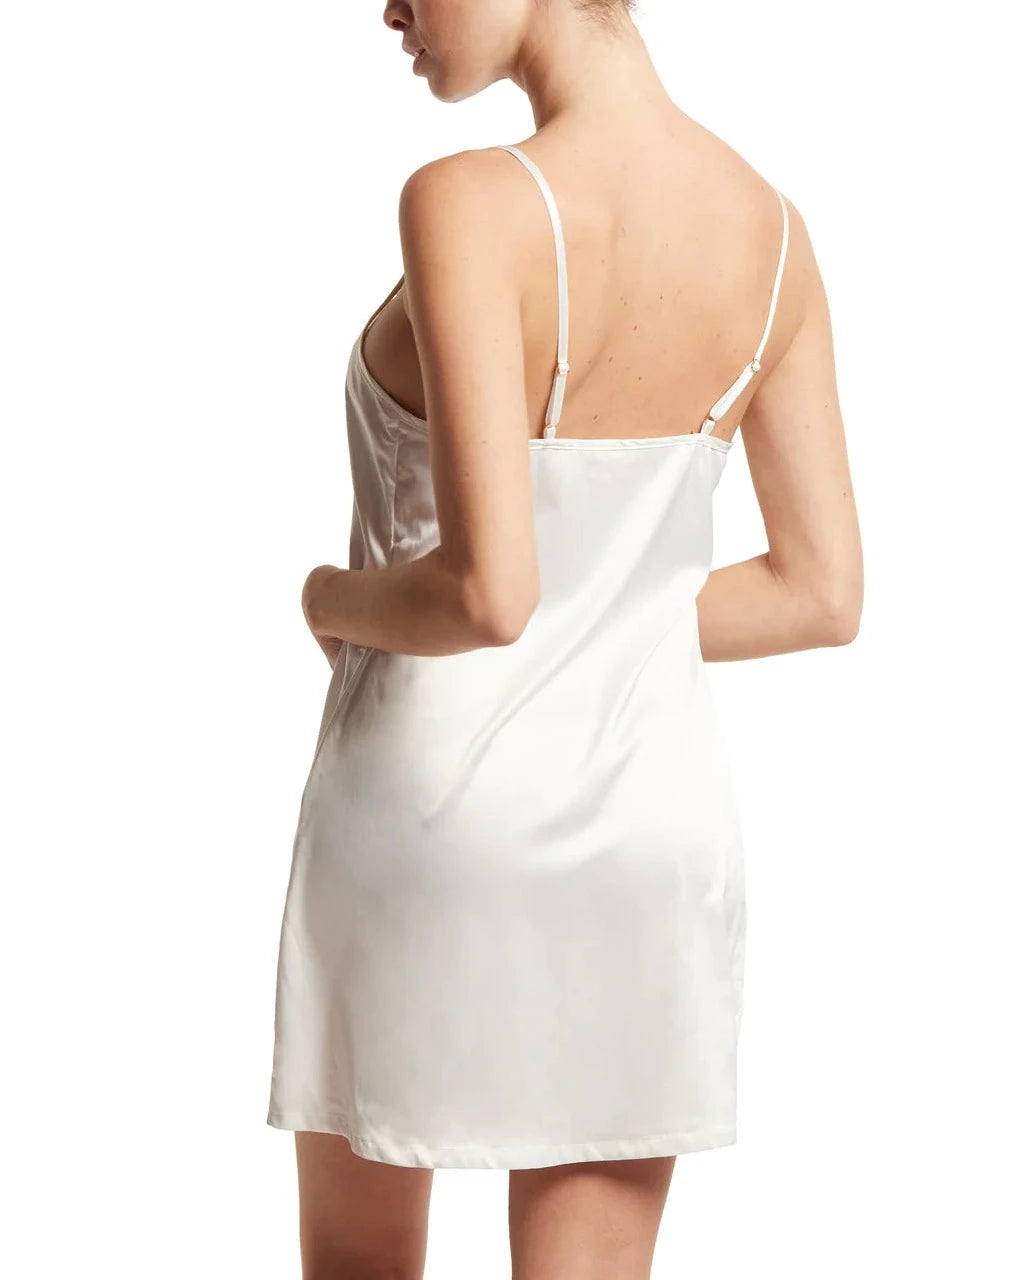 Happily Ever After Chemise - Beestung Lingerie